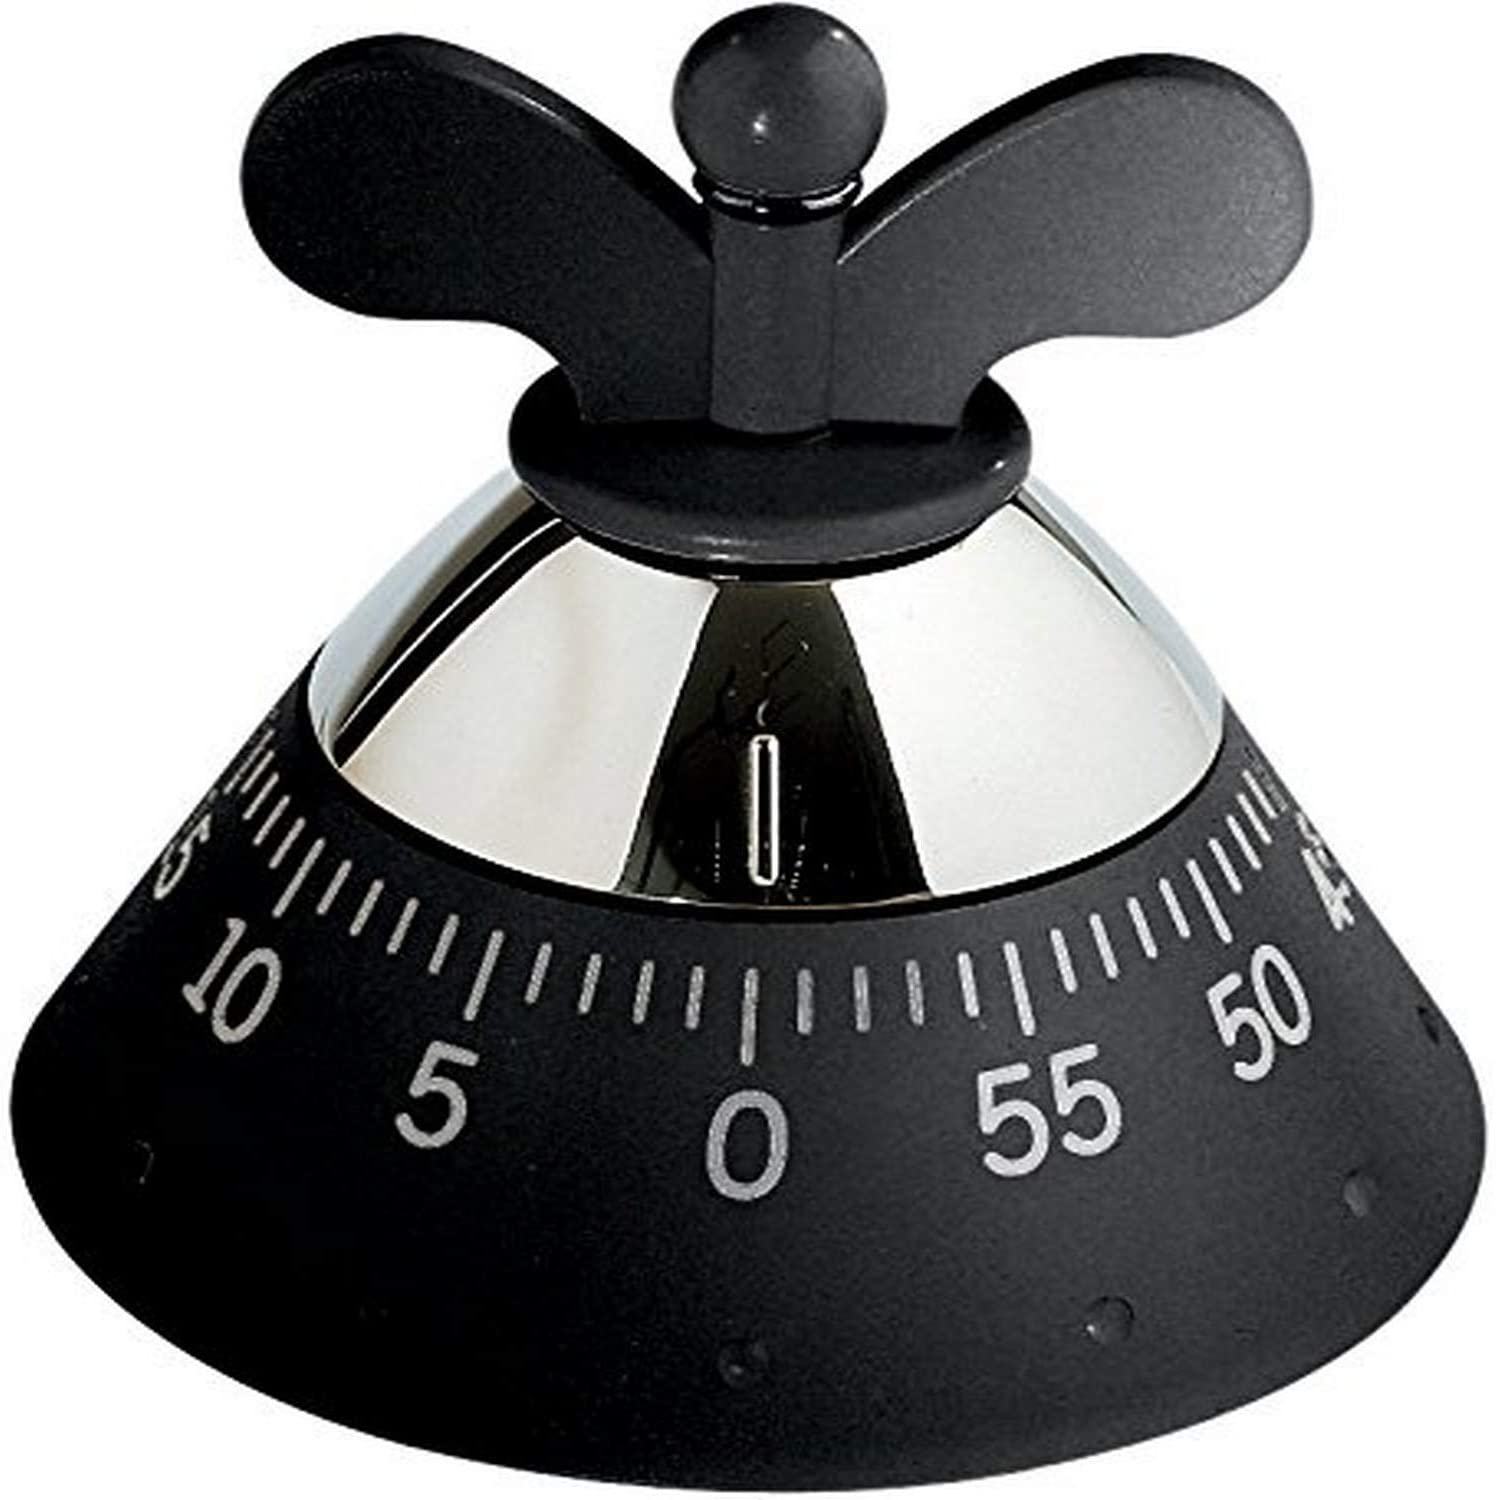 A Di Alessi Kitchen Timer in Thermoplastic Resin Featuring Mechanical Movemnet, Black